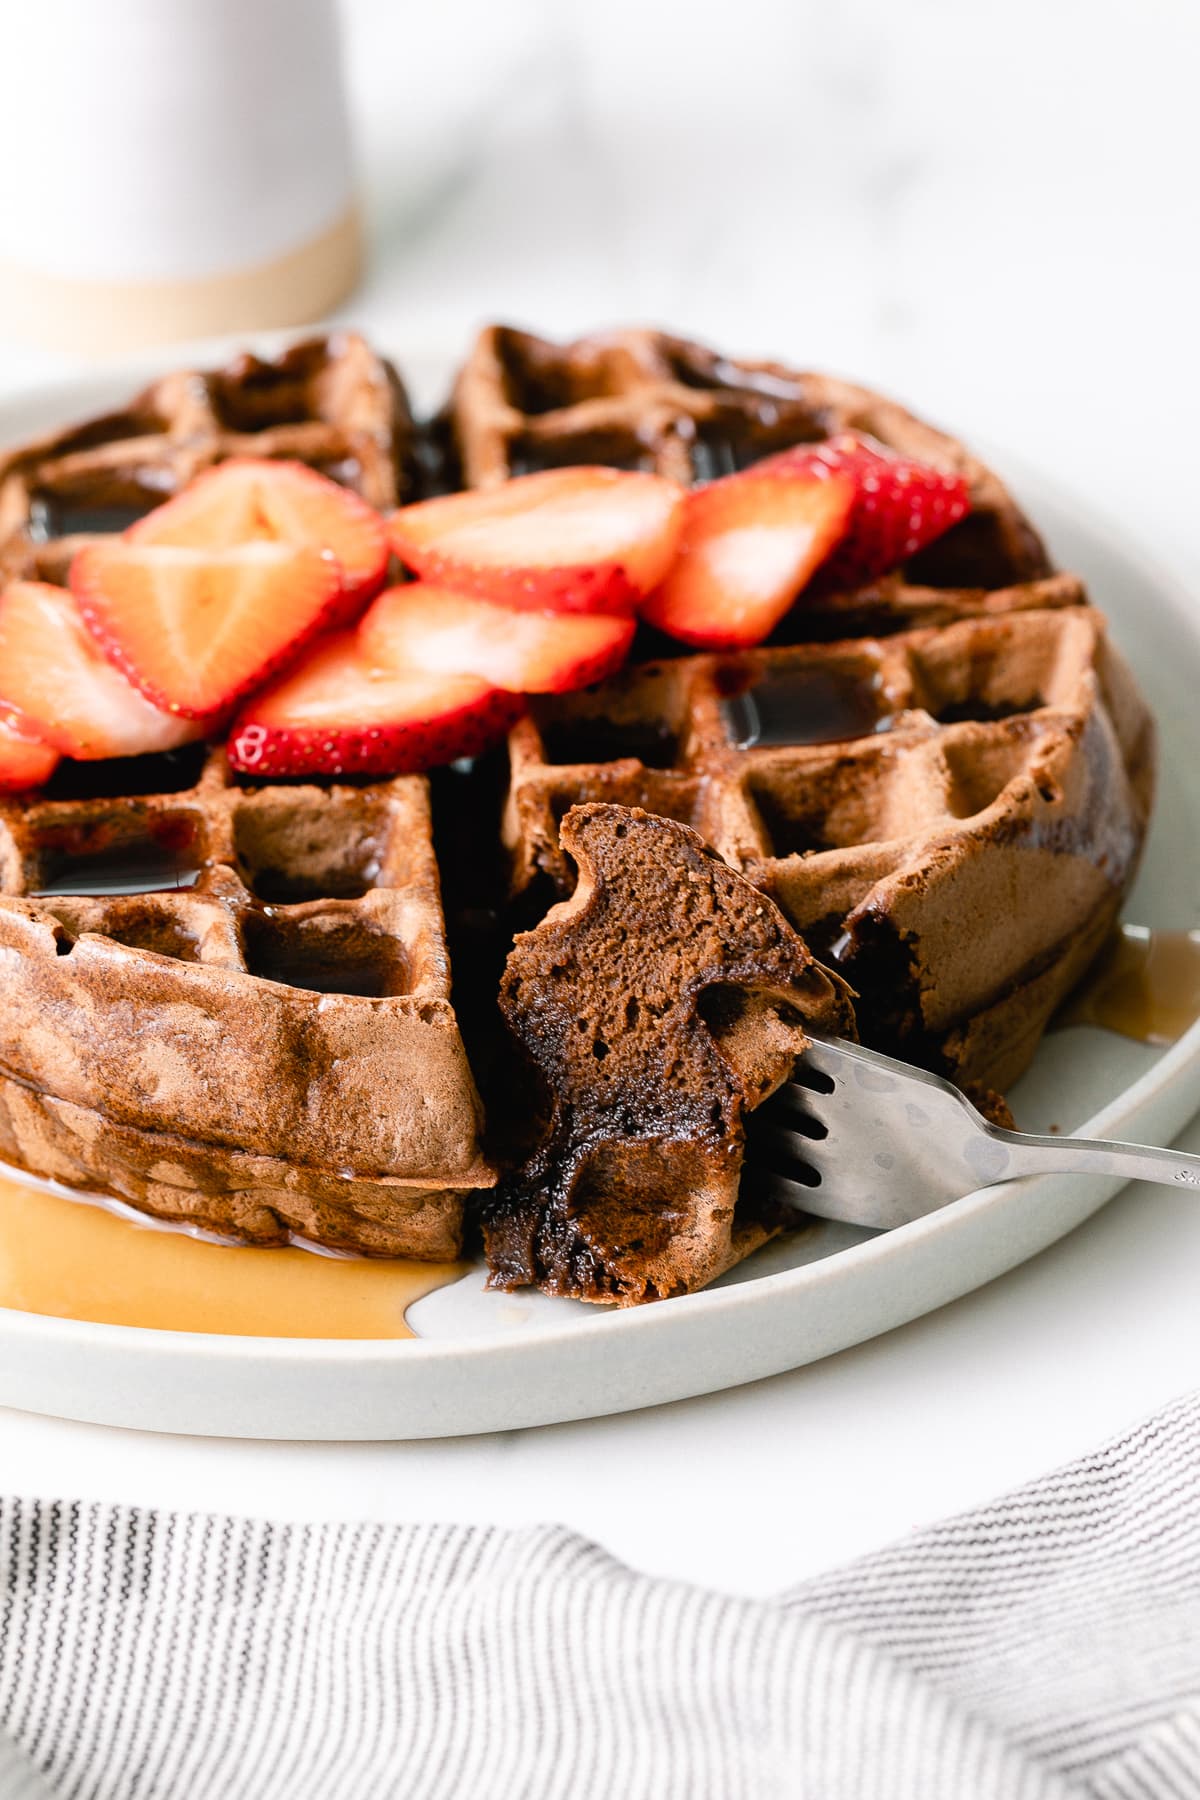 head on view of vegan chocolate belgian waffle on a plate with slice cut.